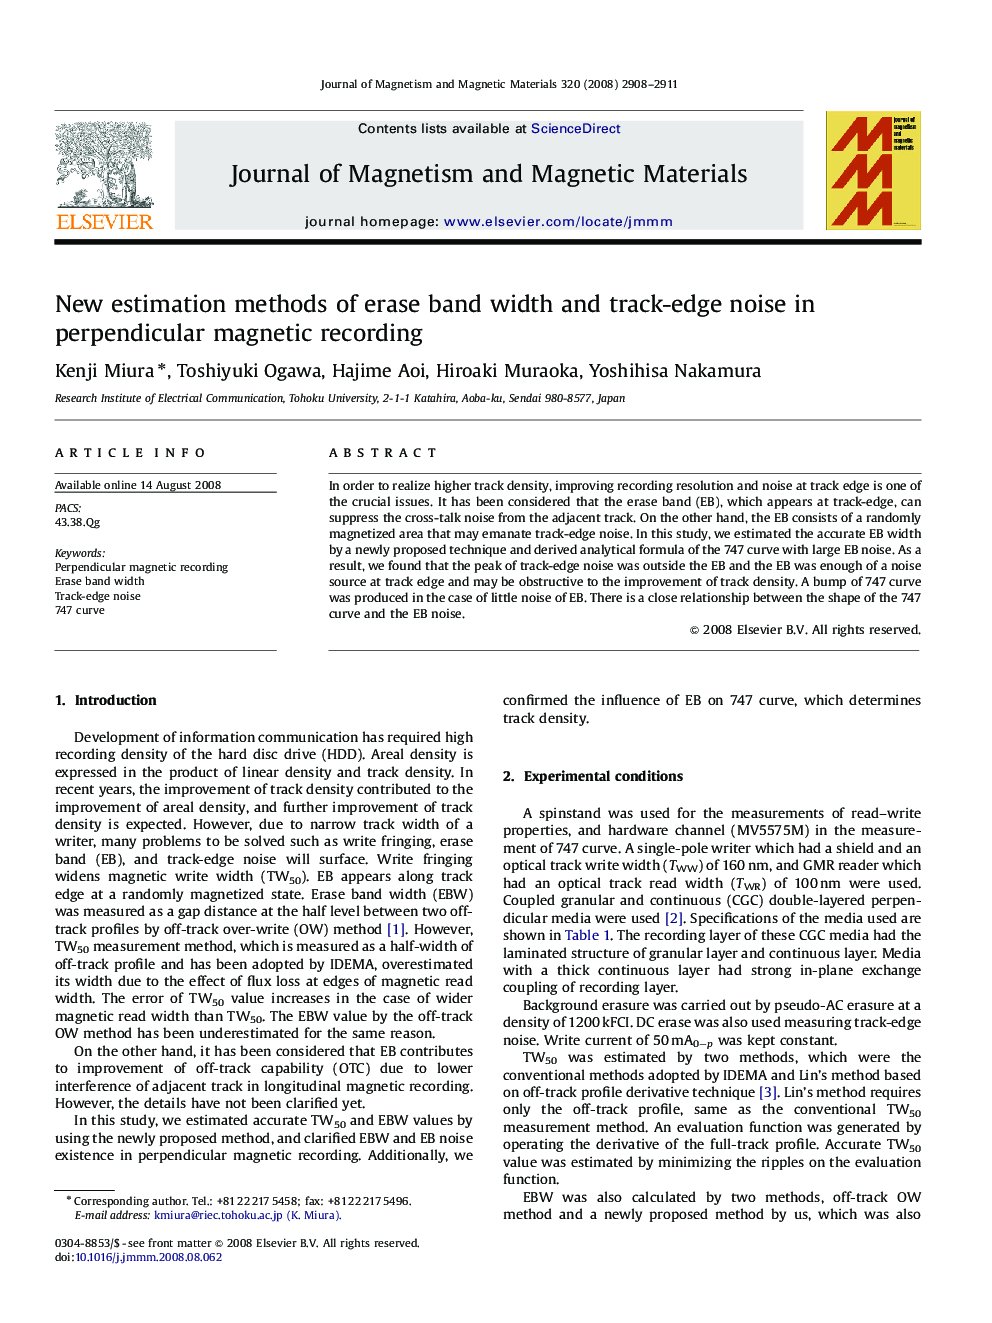 New estimation methods of erase band width and track-edge noise in perpendicular magnetic recording